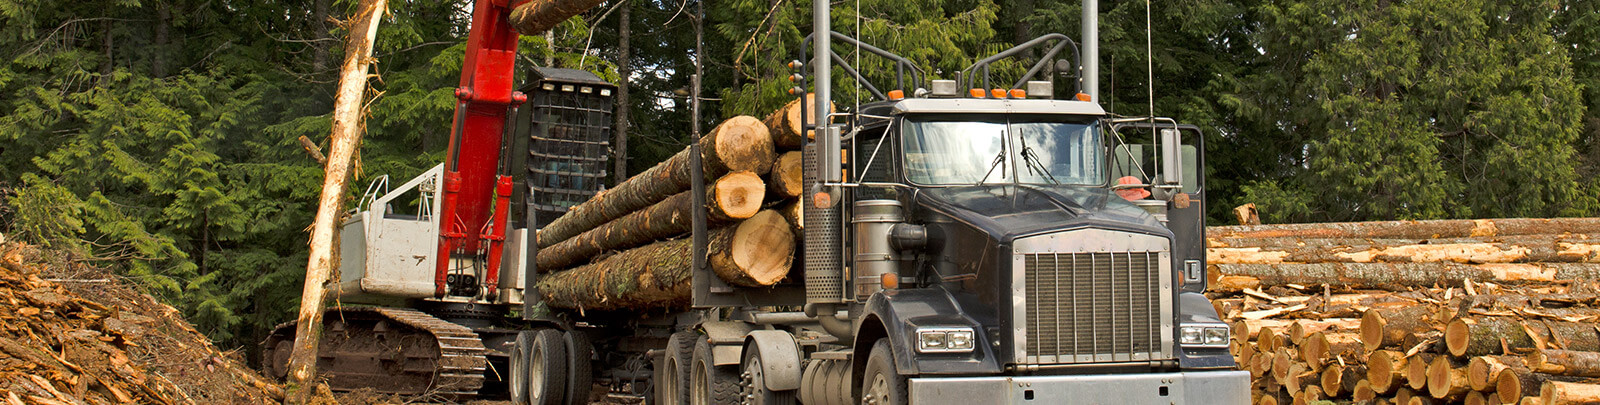 How to Measure a Big Tree - WV Division of Forestry